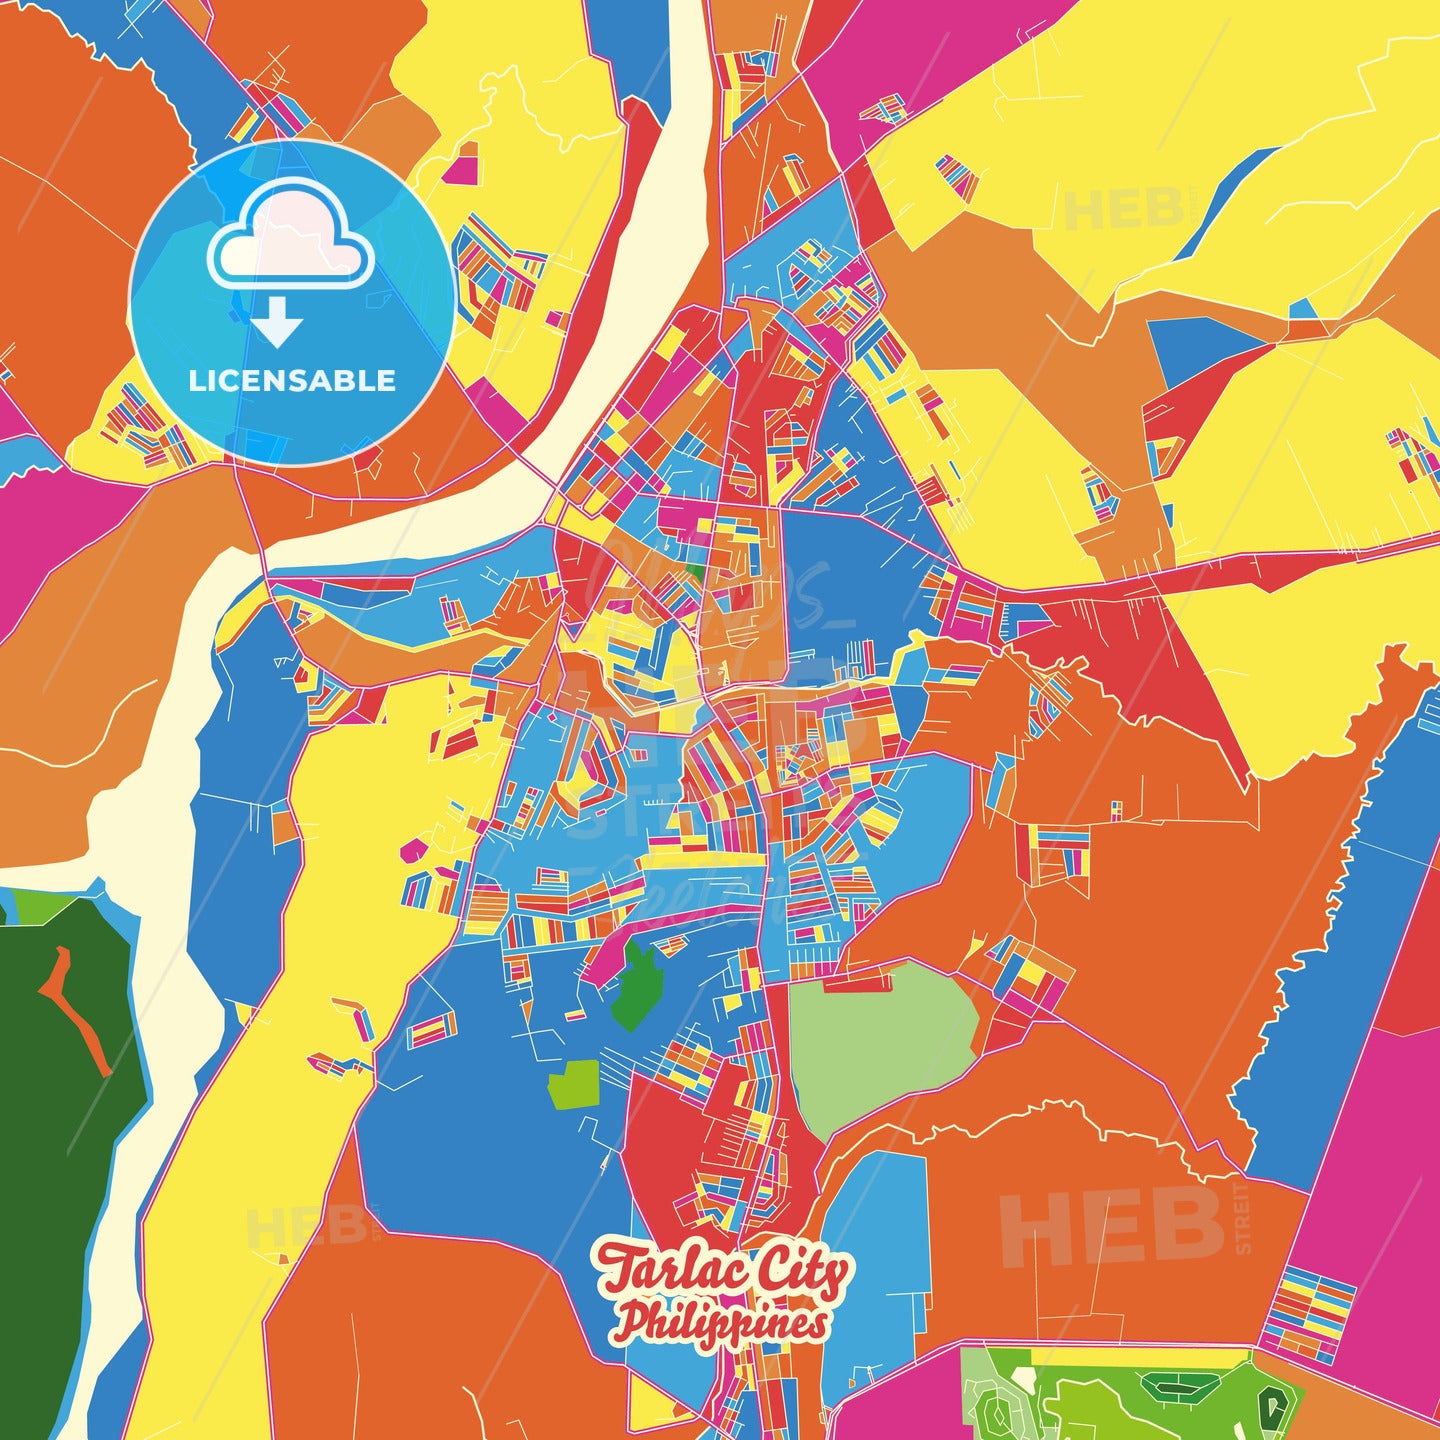 Tarlac City, Philippines Crazy Colorful Street Map Poster Template - HEBSTREITS Sketches